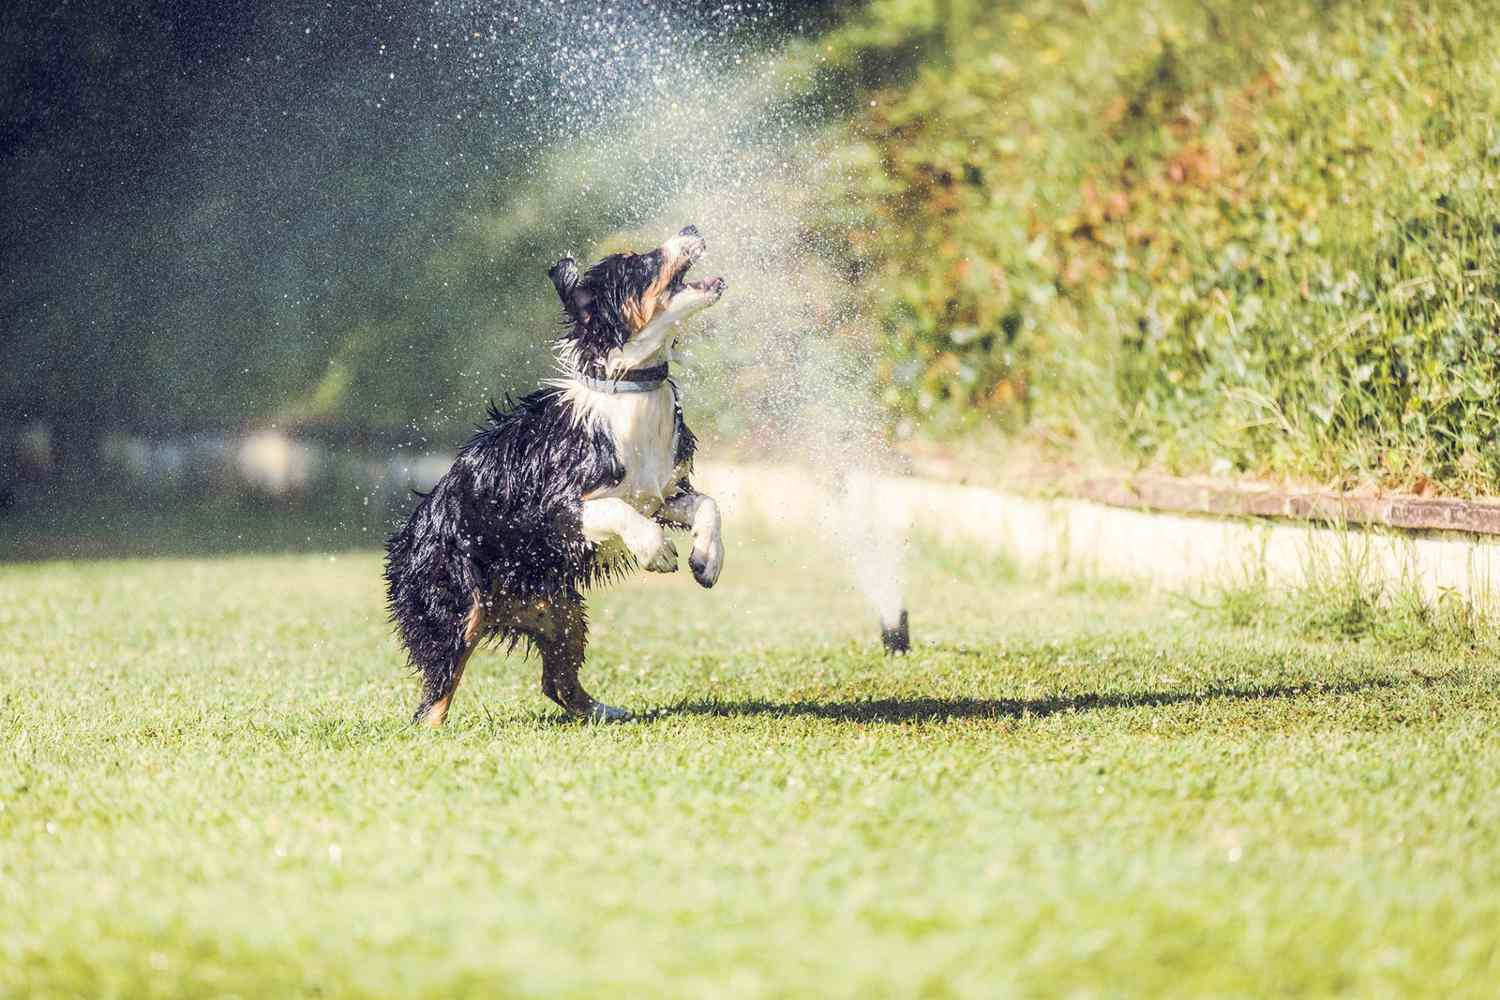 dog activity for his gotcha party, playing in a sprinkler